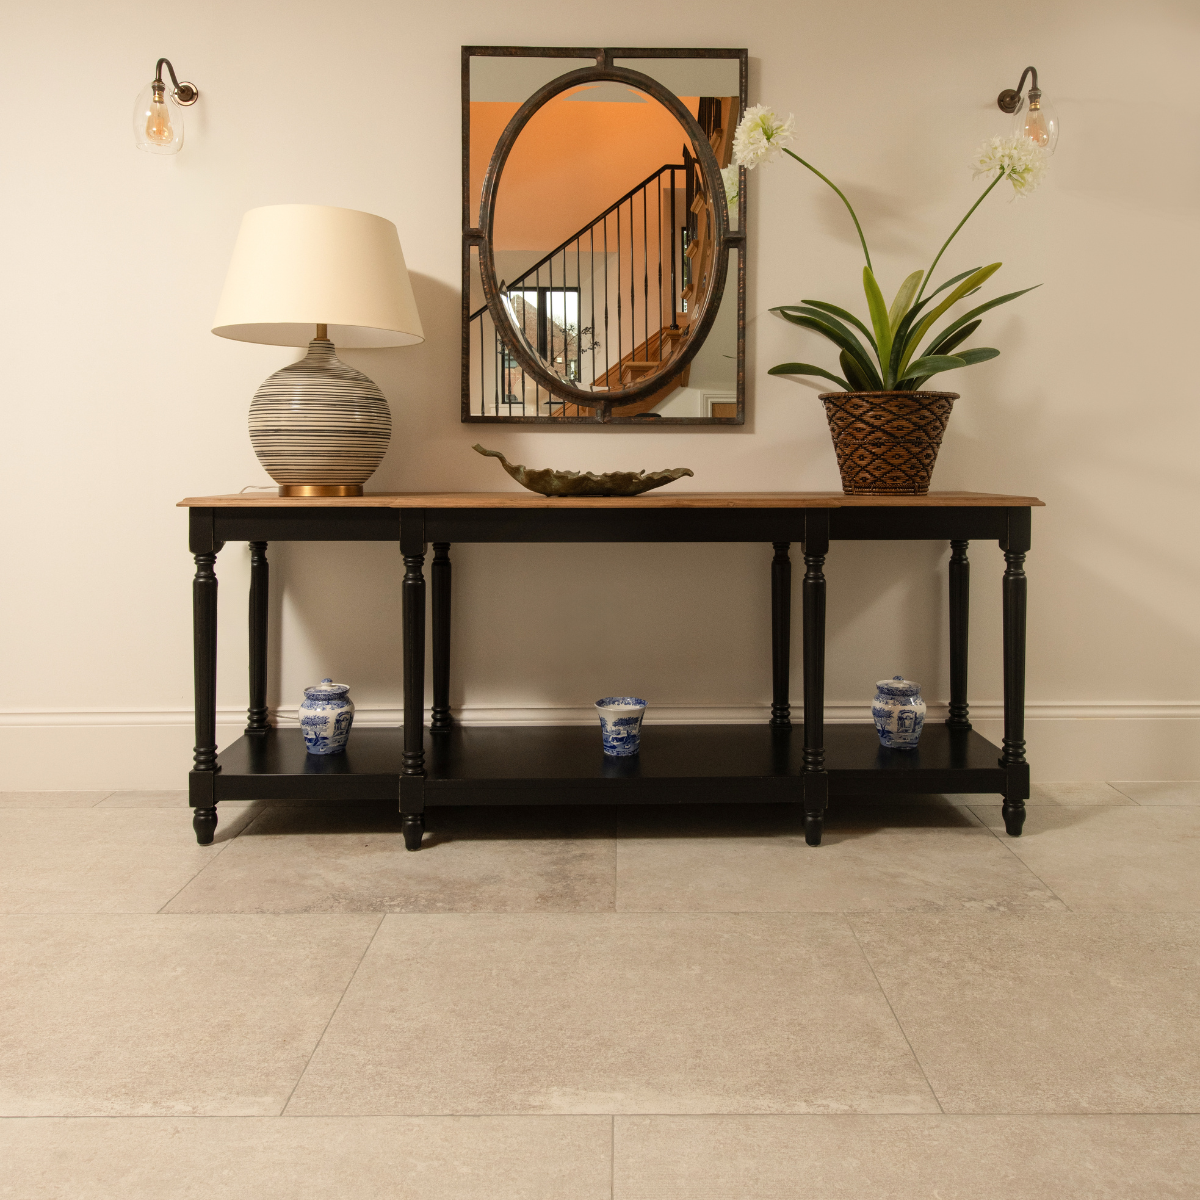 Lapicida Danby Grange hallway with porcelain stone tiles, perfect for high traffic interiors